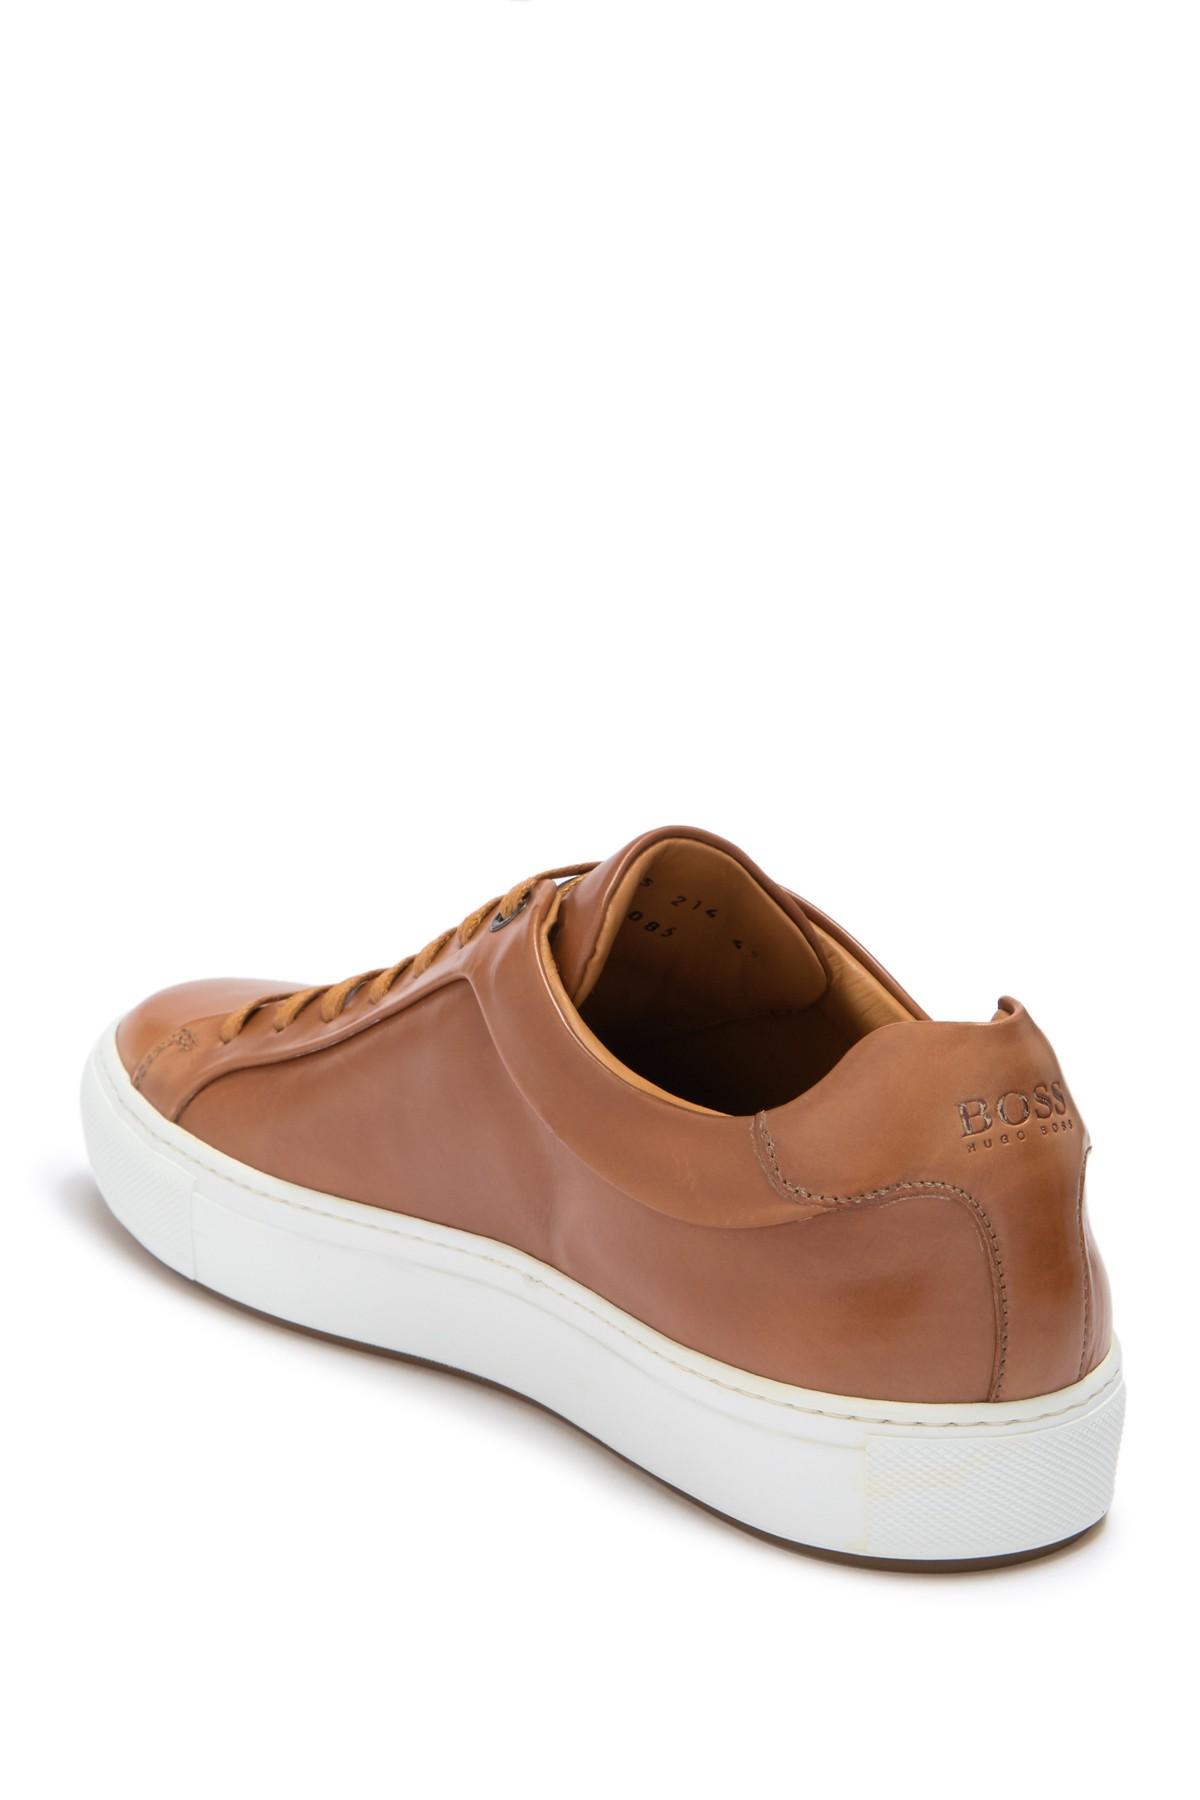 BOSS Tennis-style Sneakers In Burnished Leather in Brown for Men - Lyst